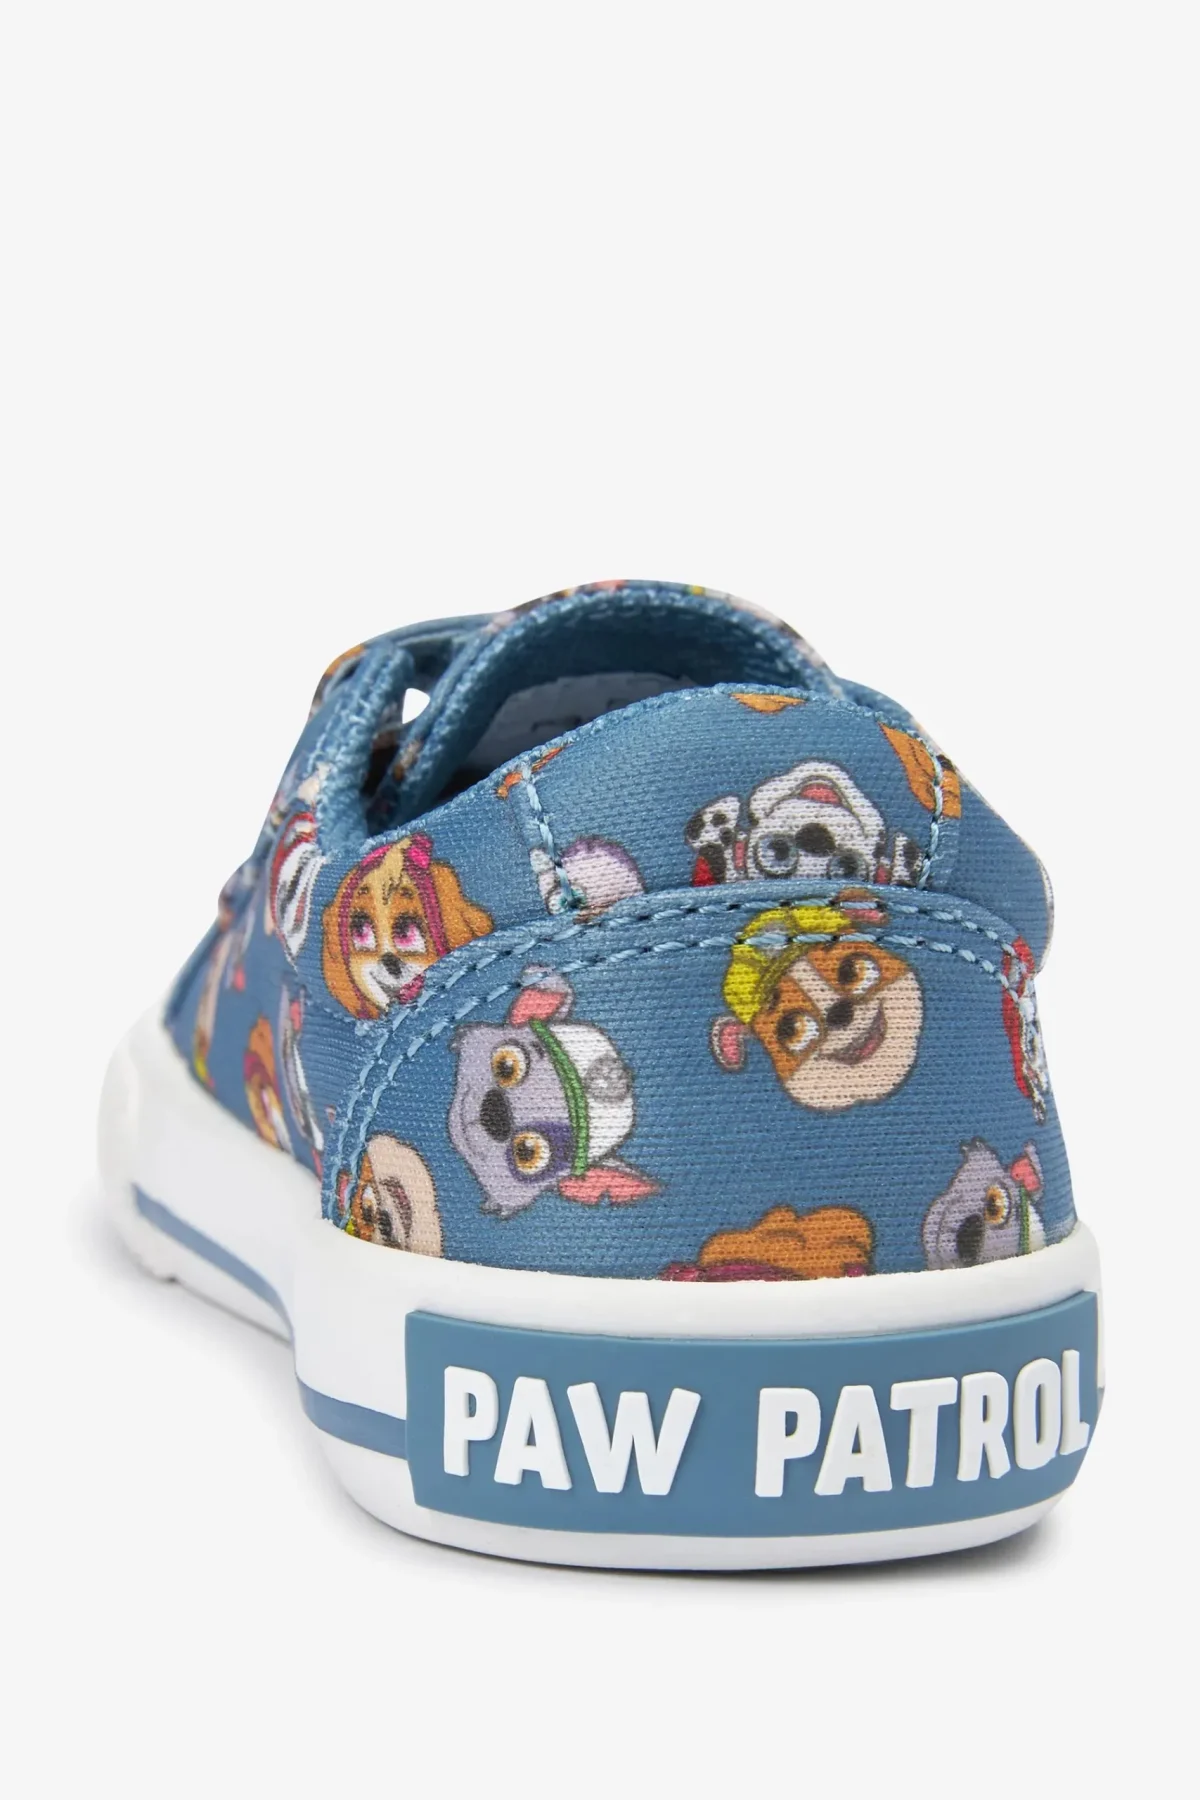 papatrol shoes